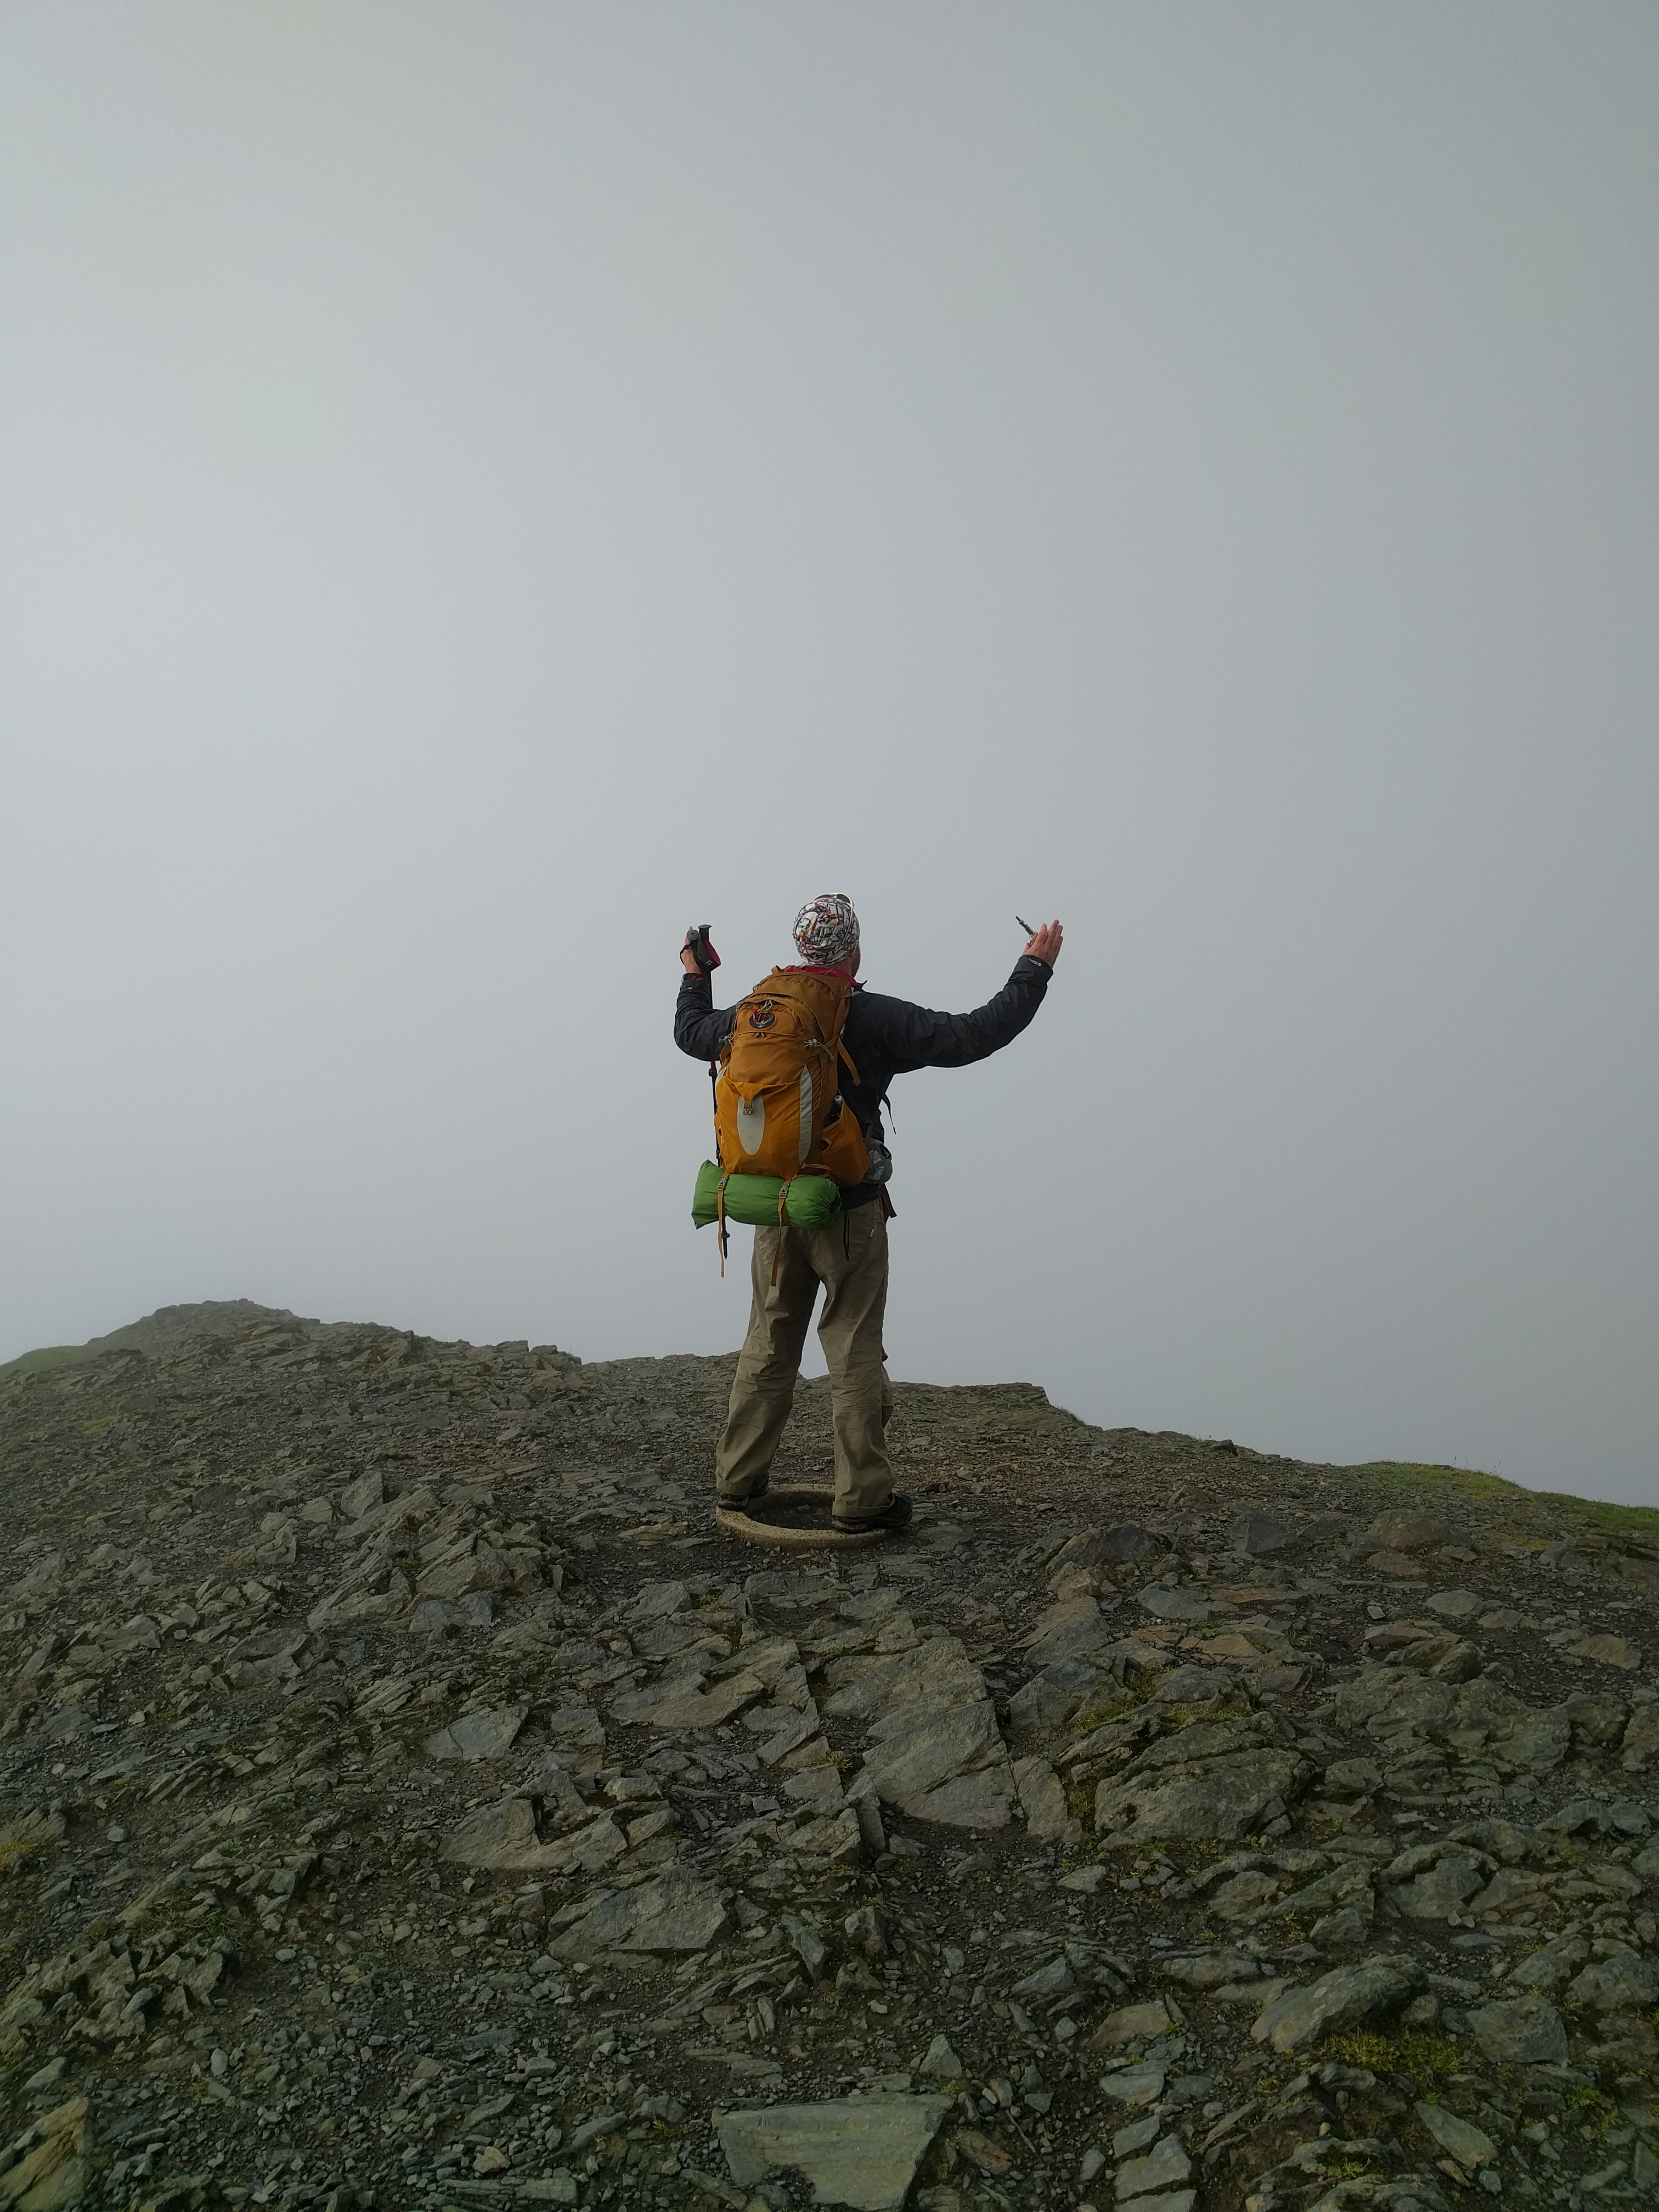 Colin stands atop Blencathra, looks down on England and tells them they're all Bellends